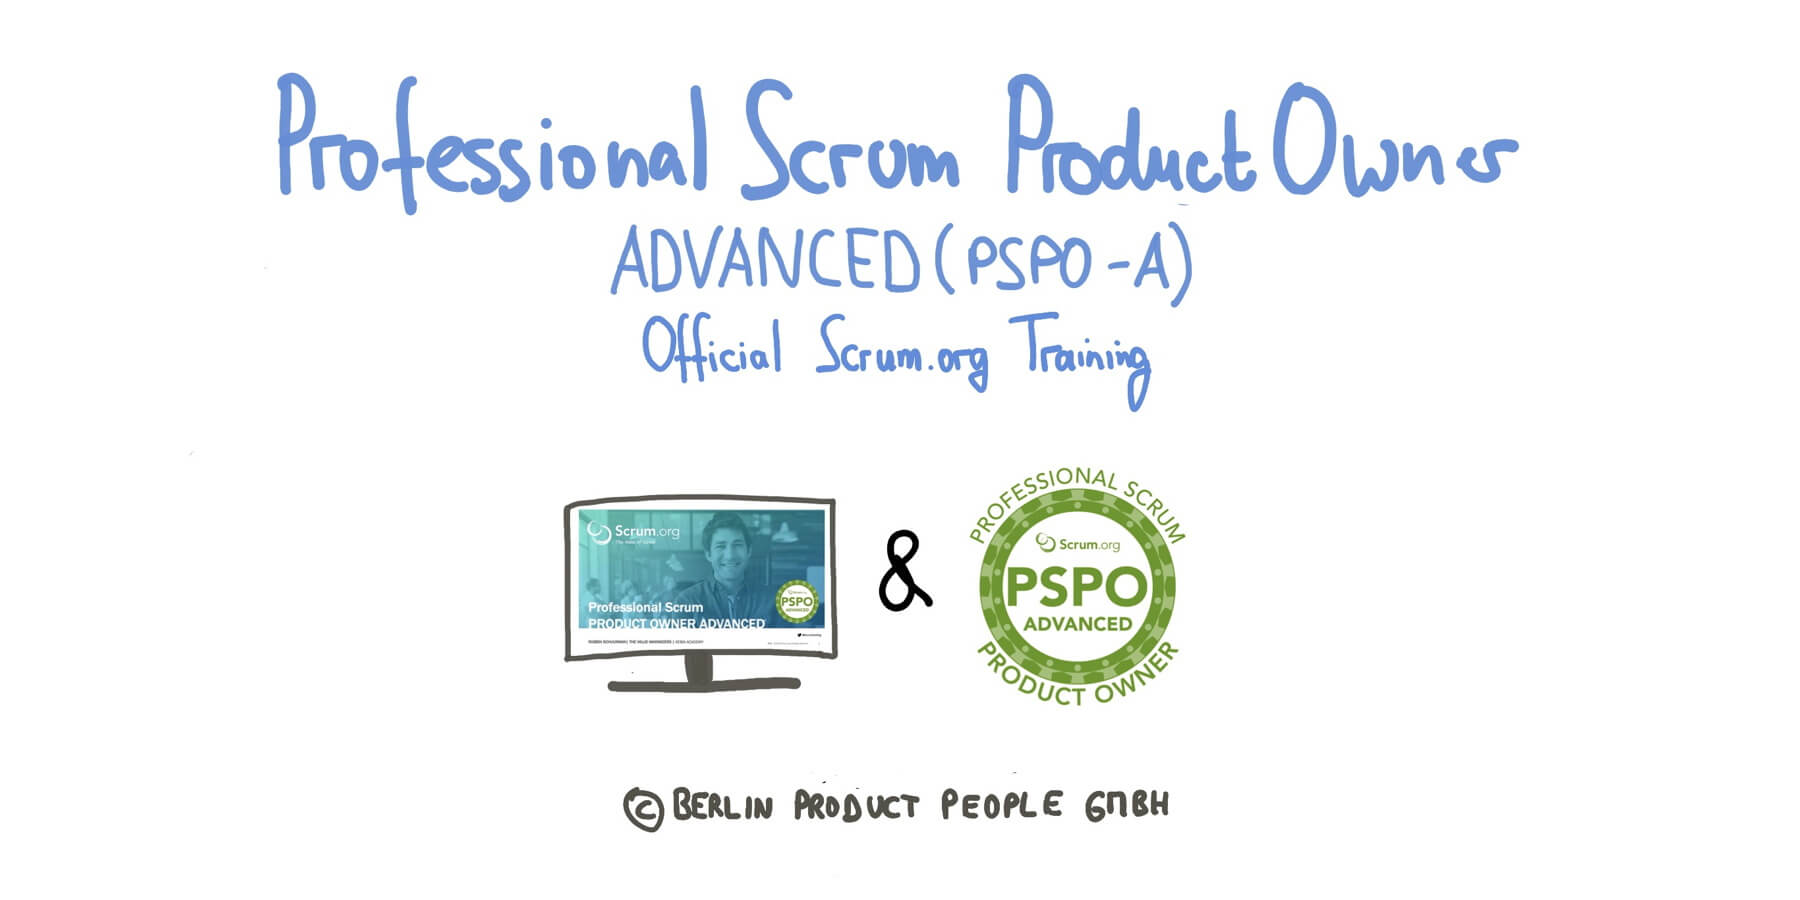 Fortgeschrittenen Professional Scrum Product Owner Advanced PSPO-A Schulung mit PSPO II Zertifikat — Berlin Product People GmbH